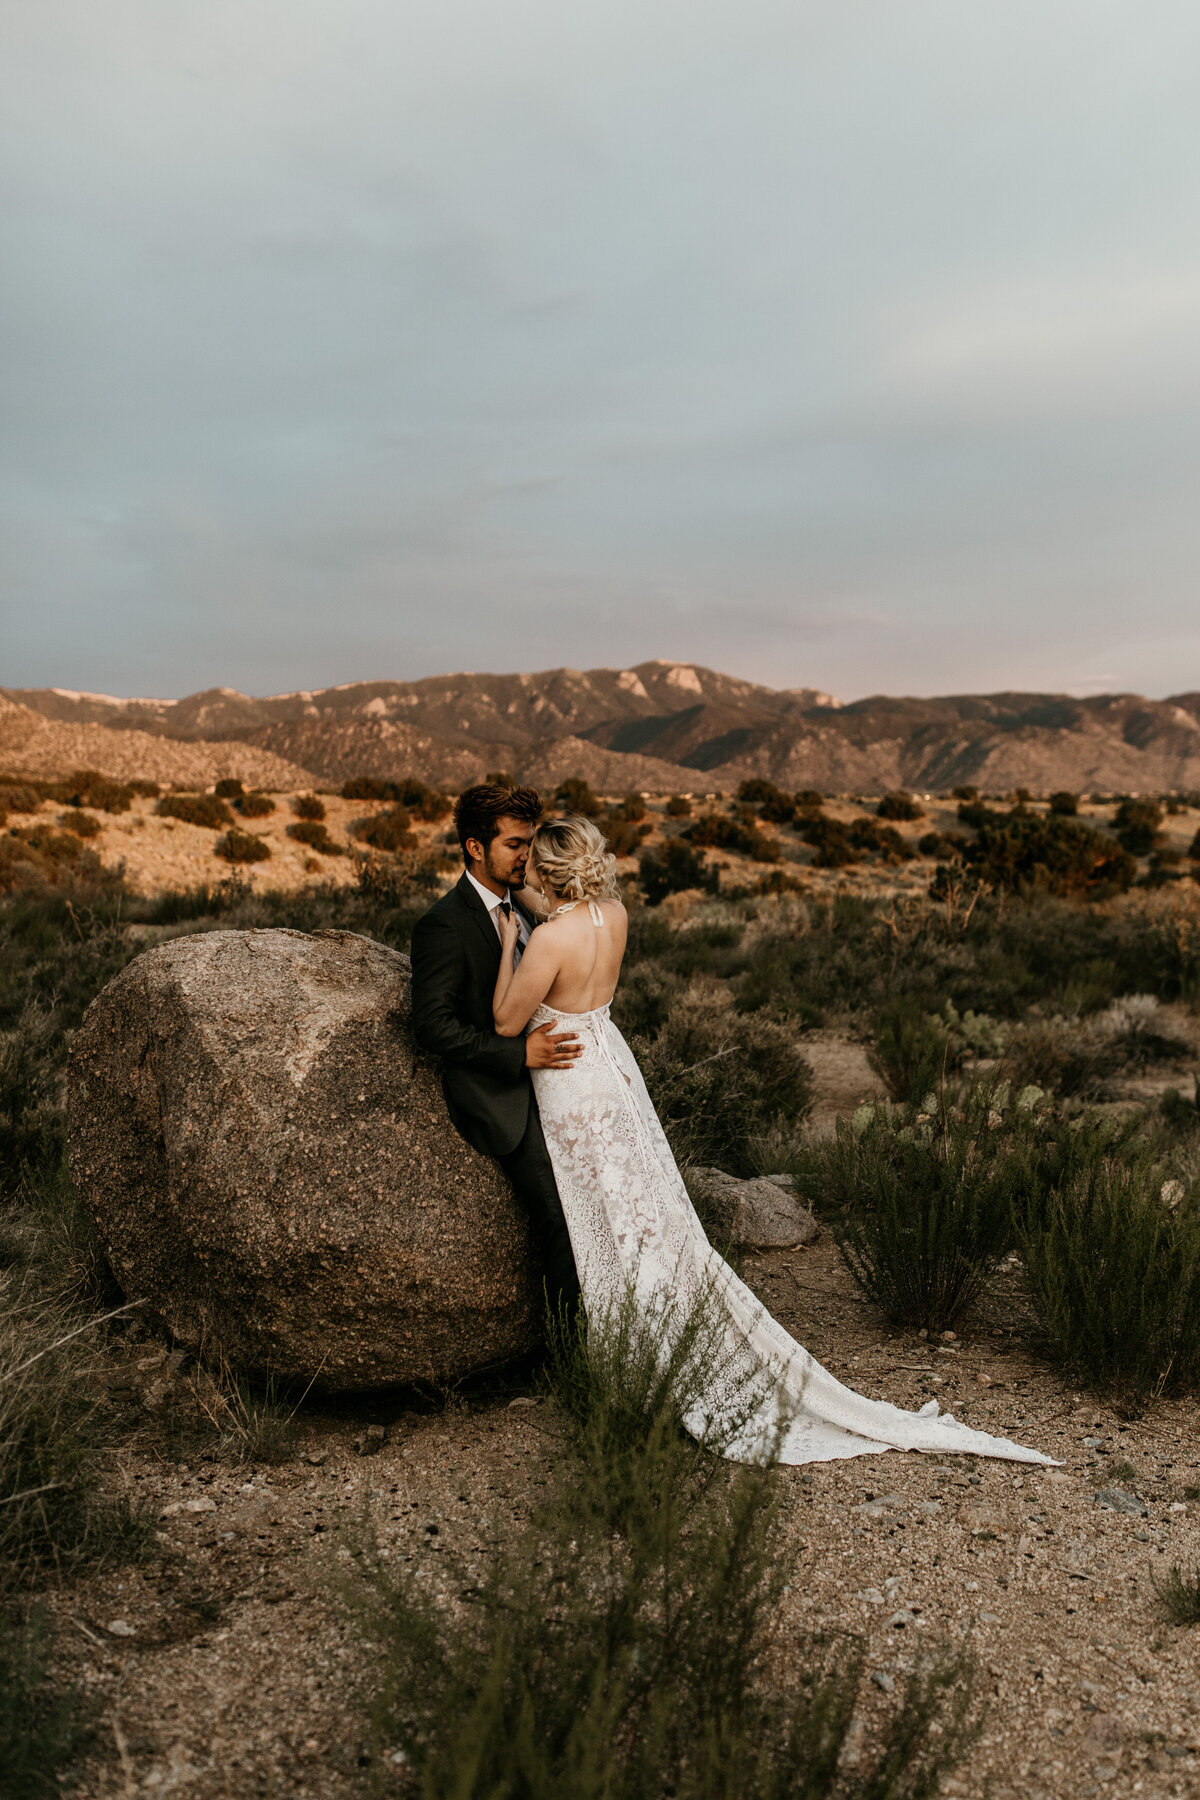 bride leaning on groom in the Albuquerque desert mountains